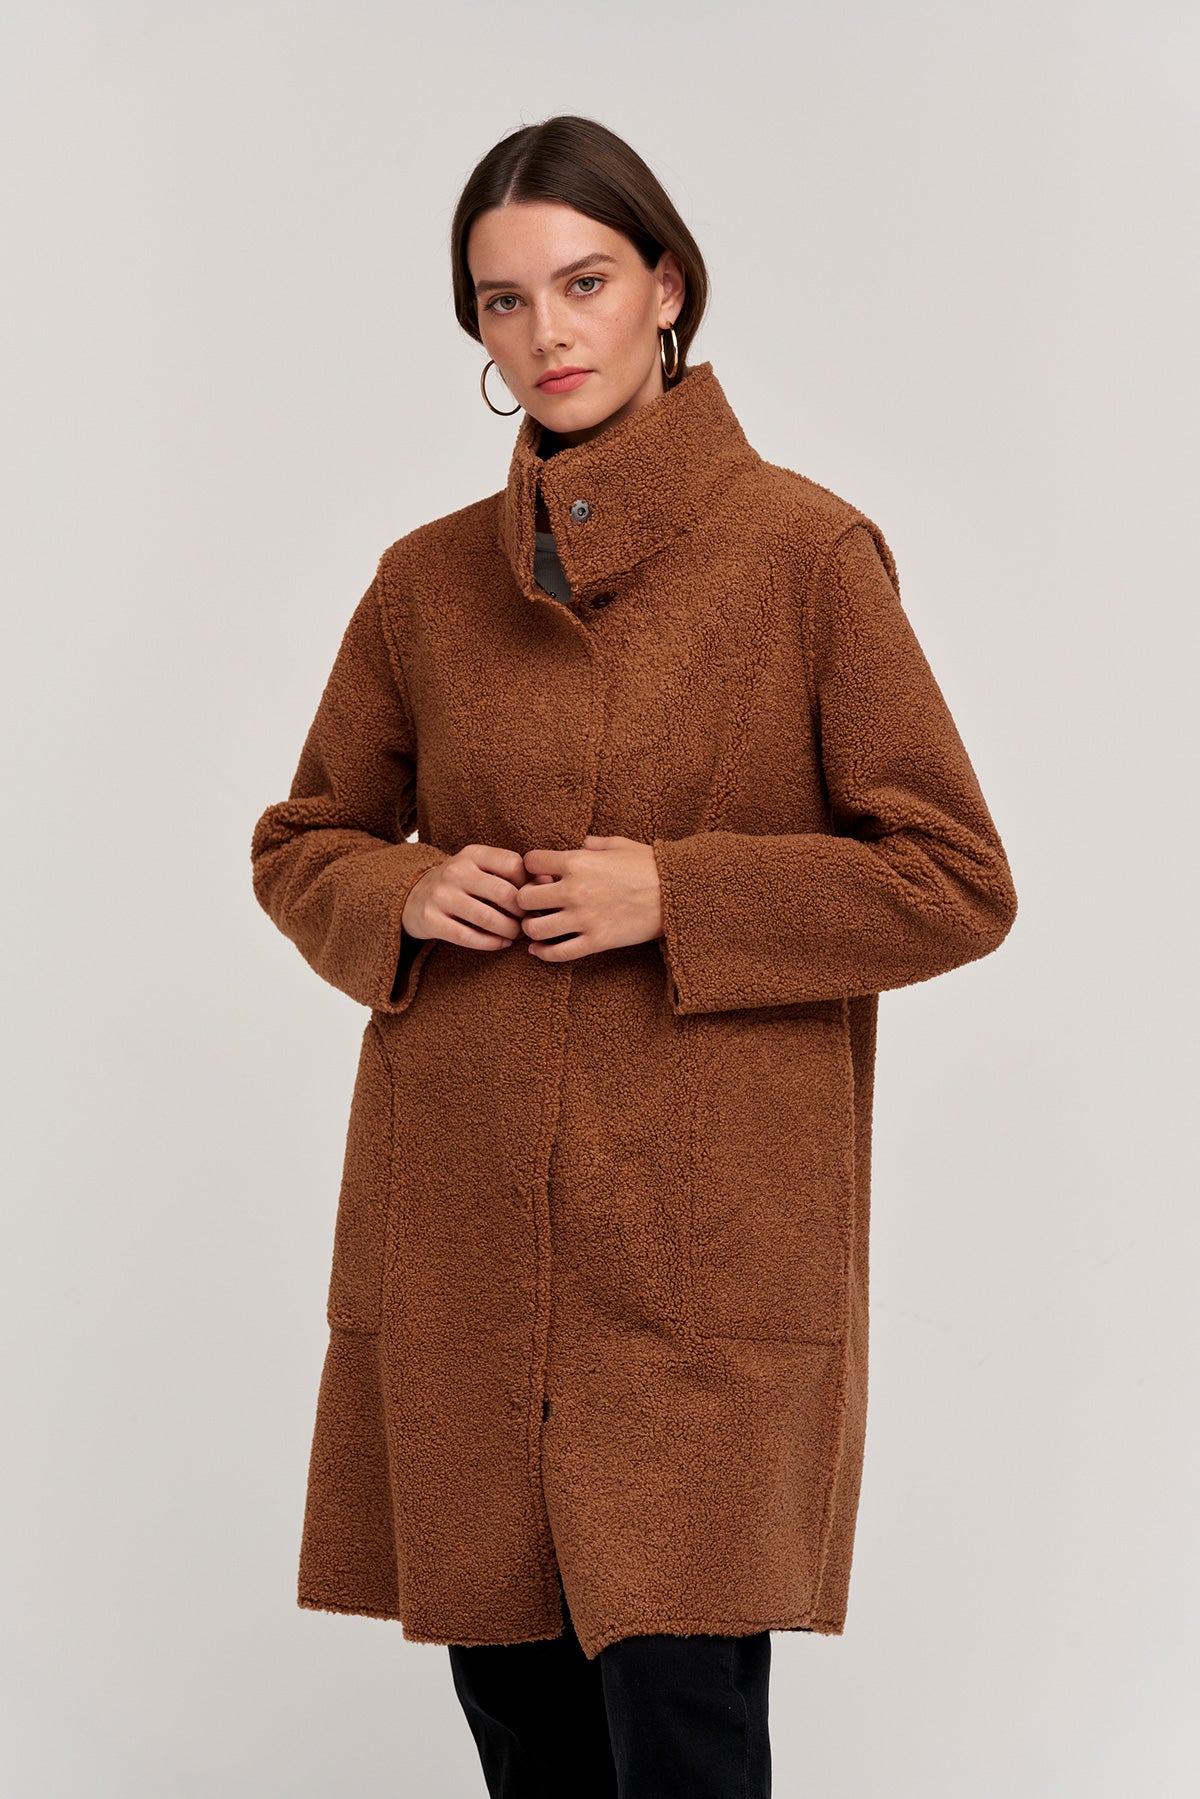   Mirabel Faux Lux Sherpa Reversible Coat front view 